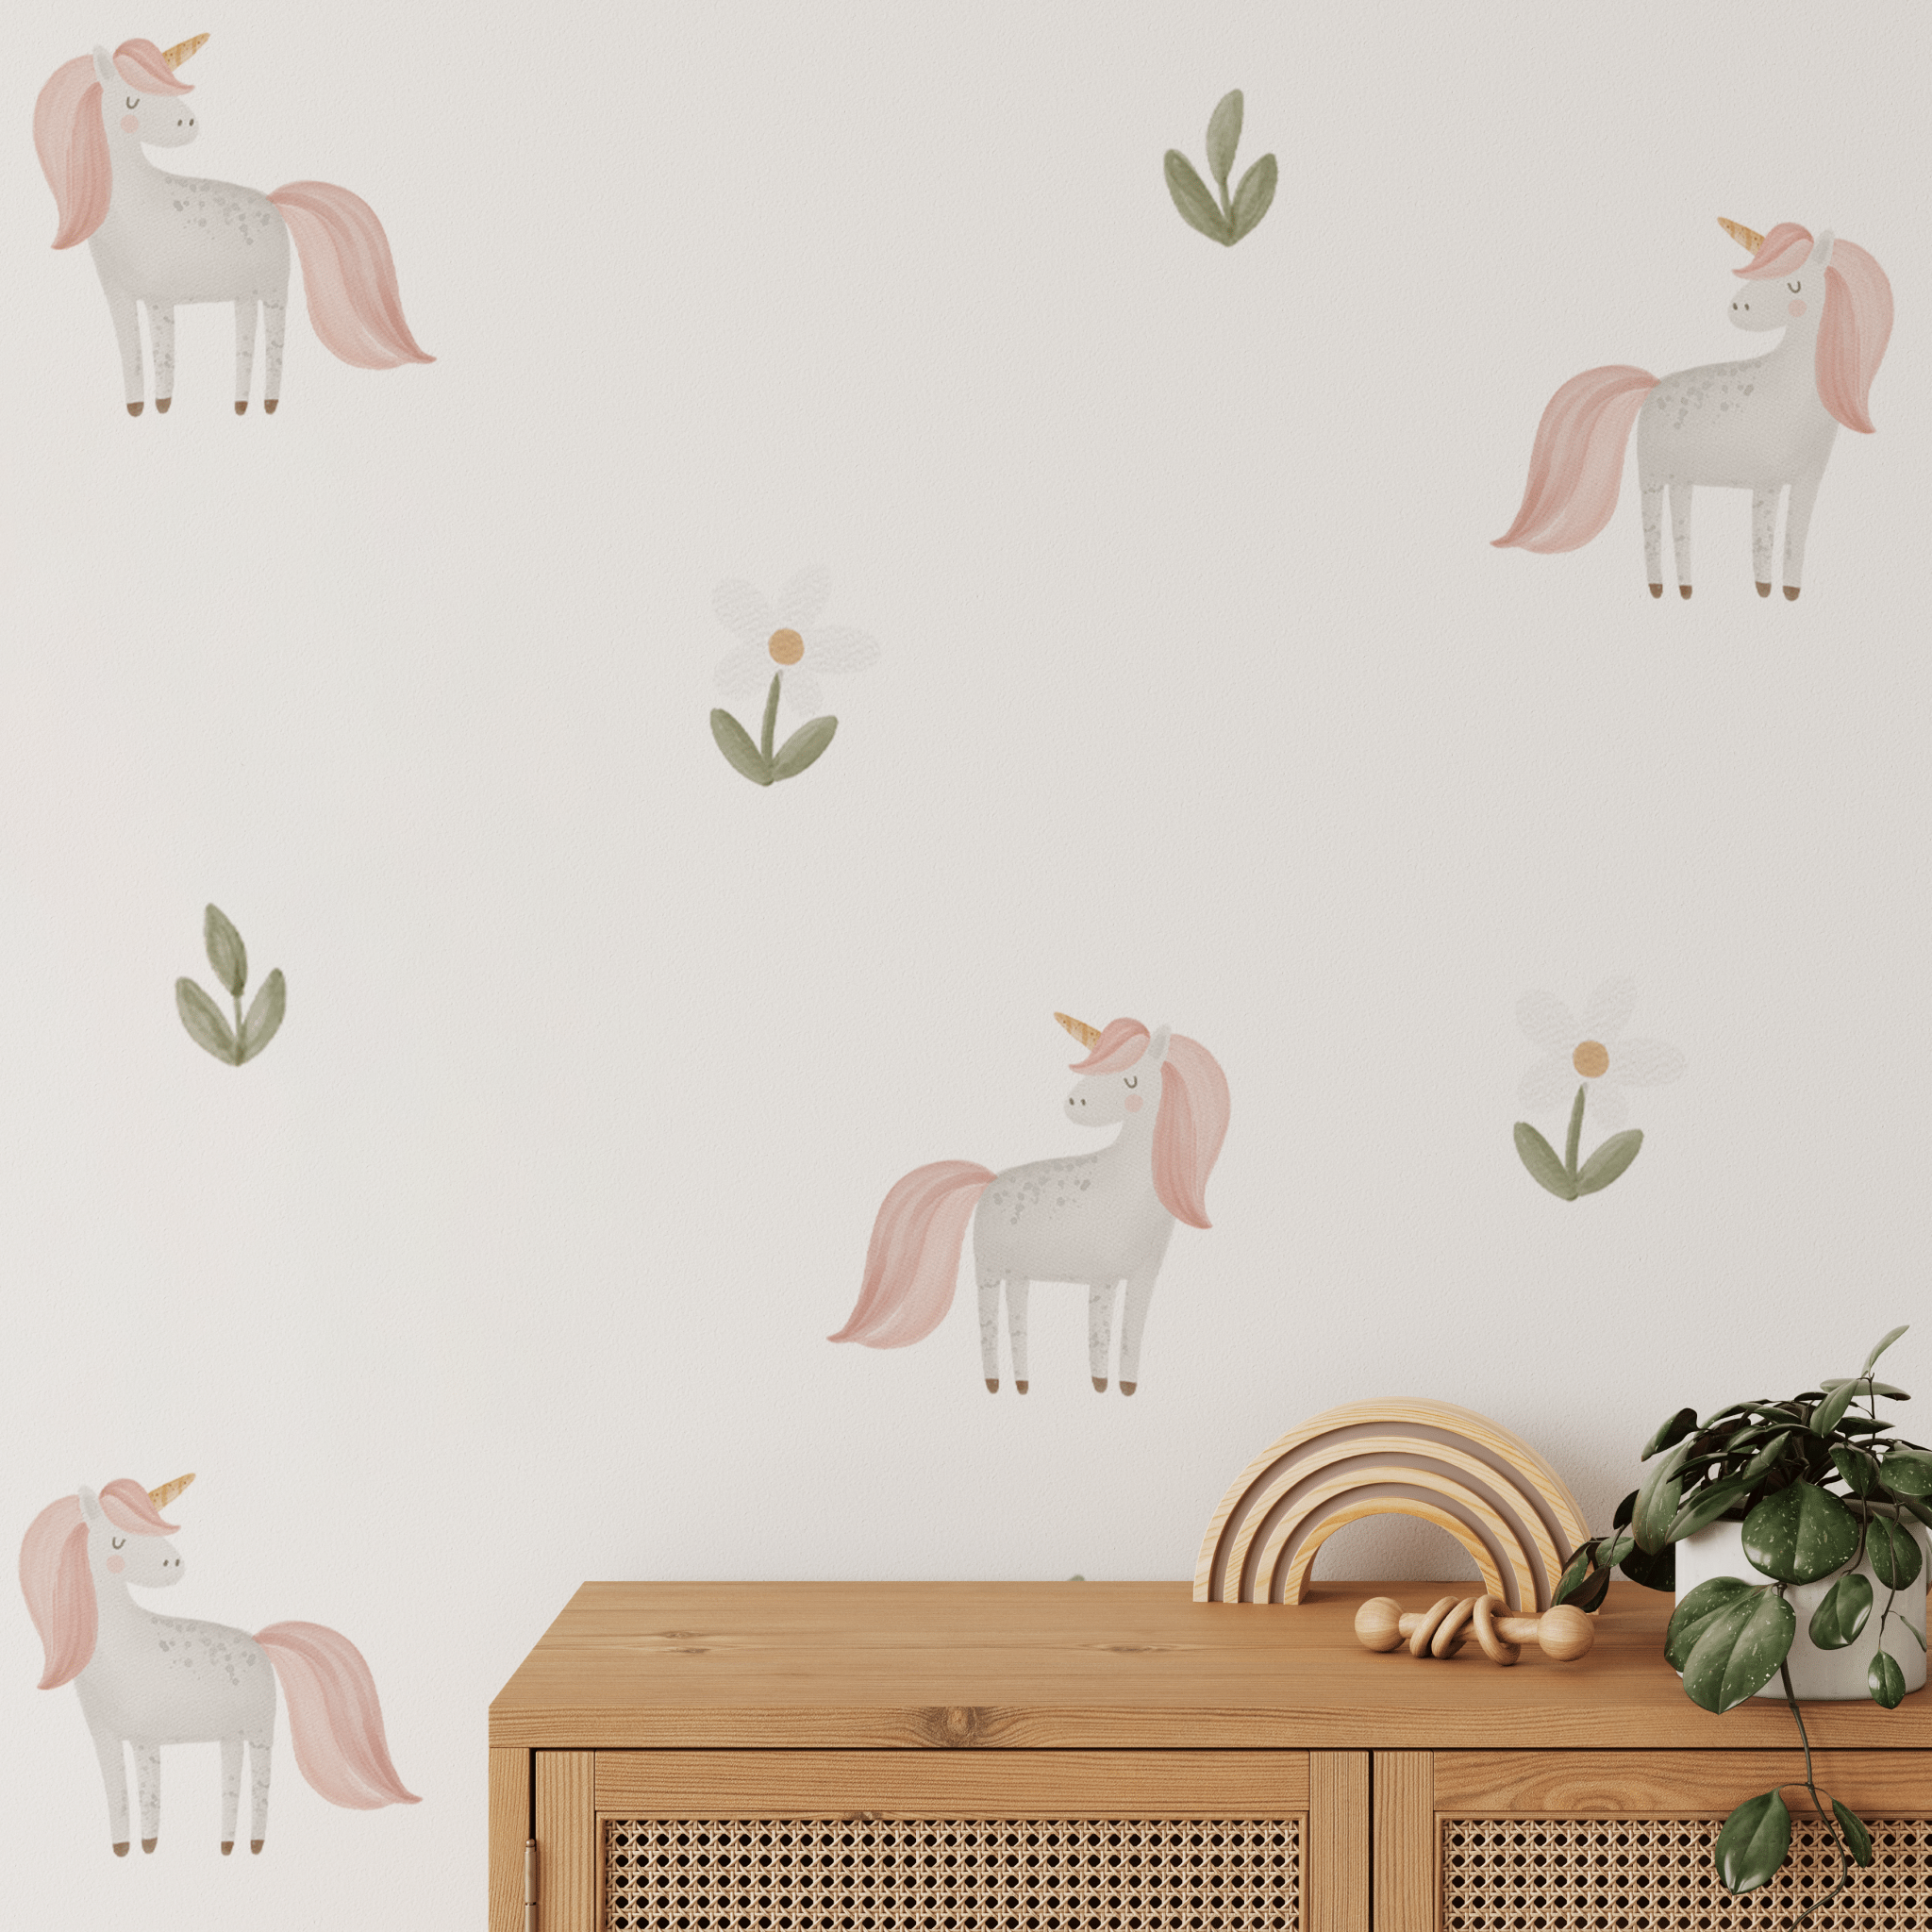 Unicorn and flower hand painted removable wall decals